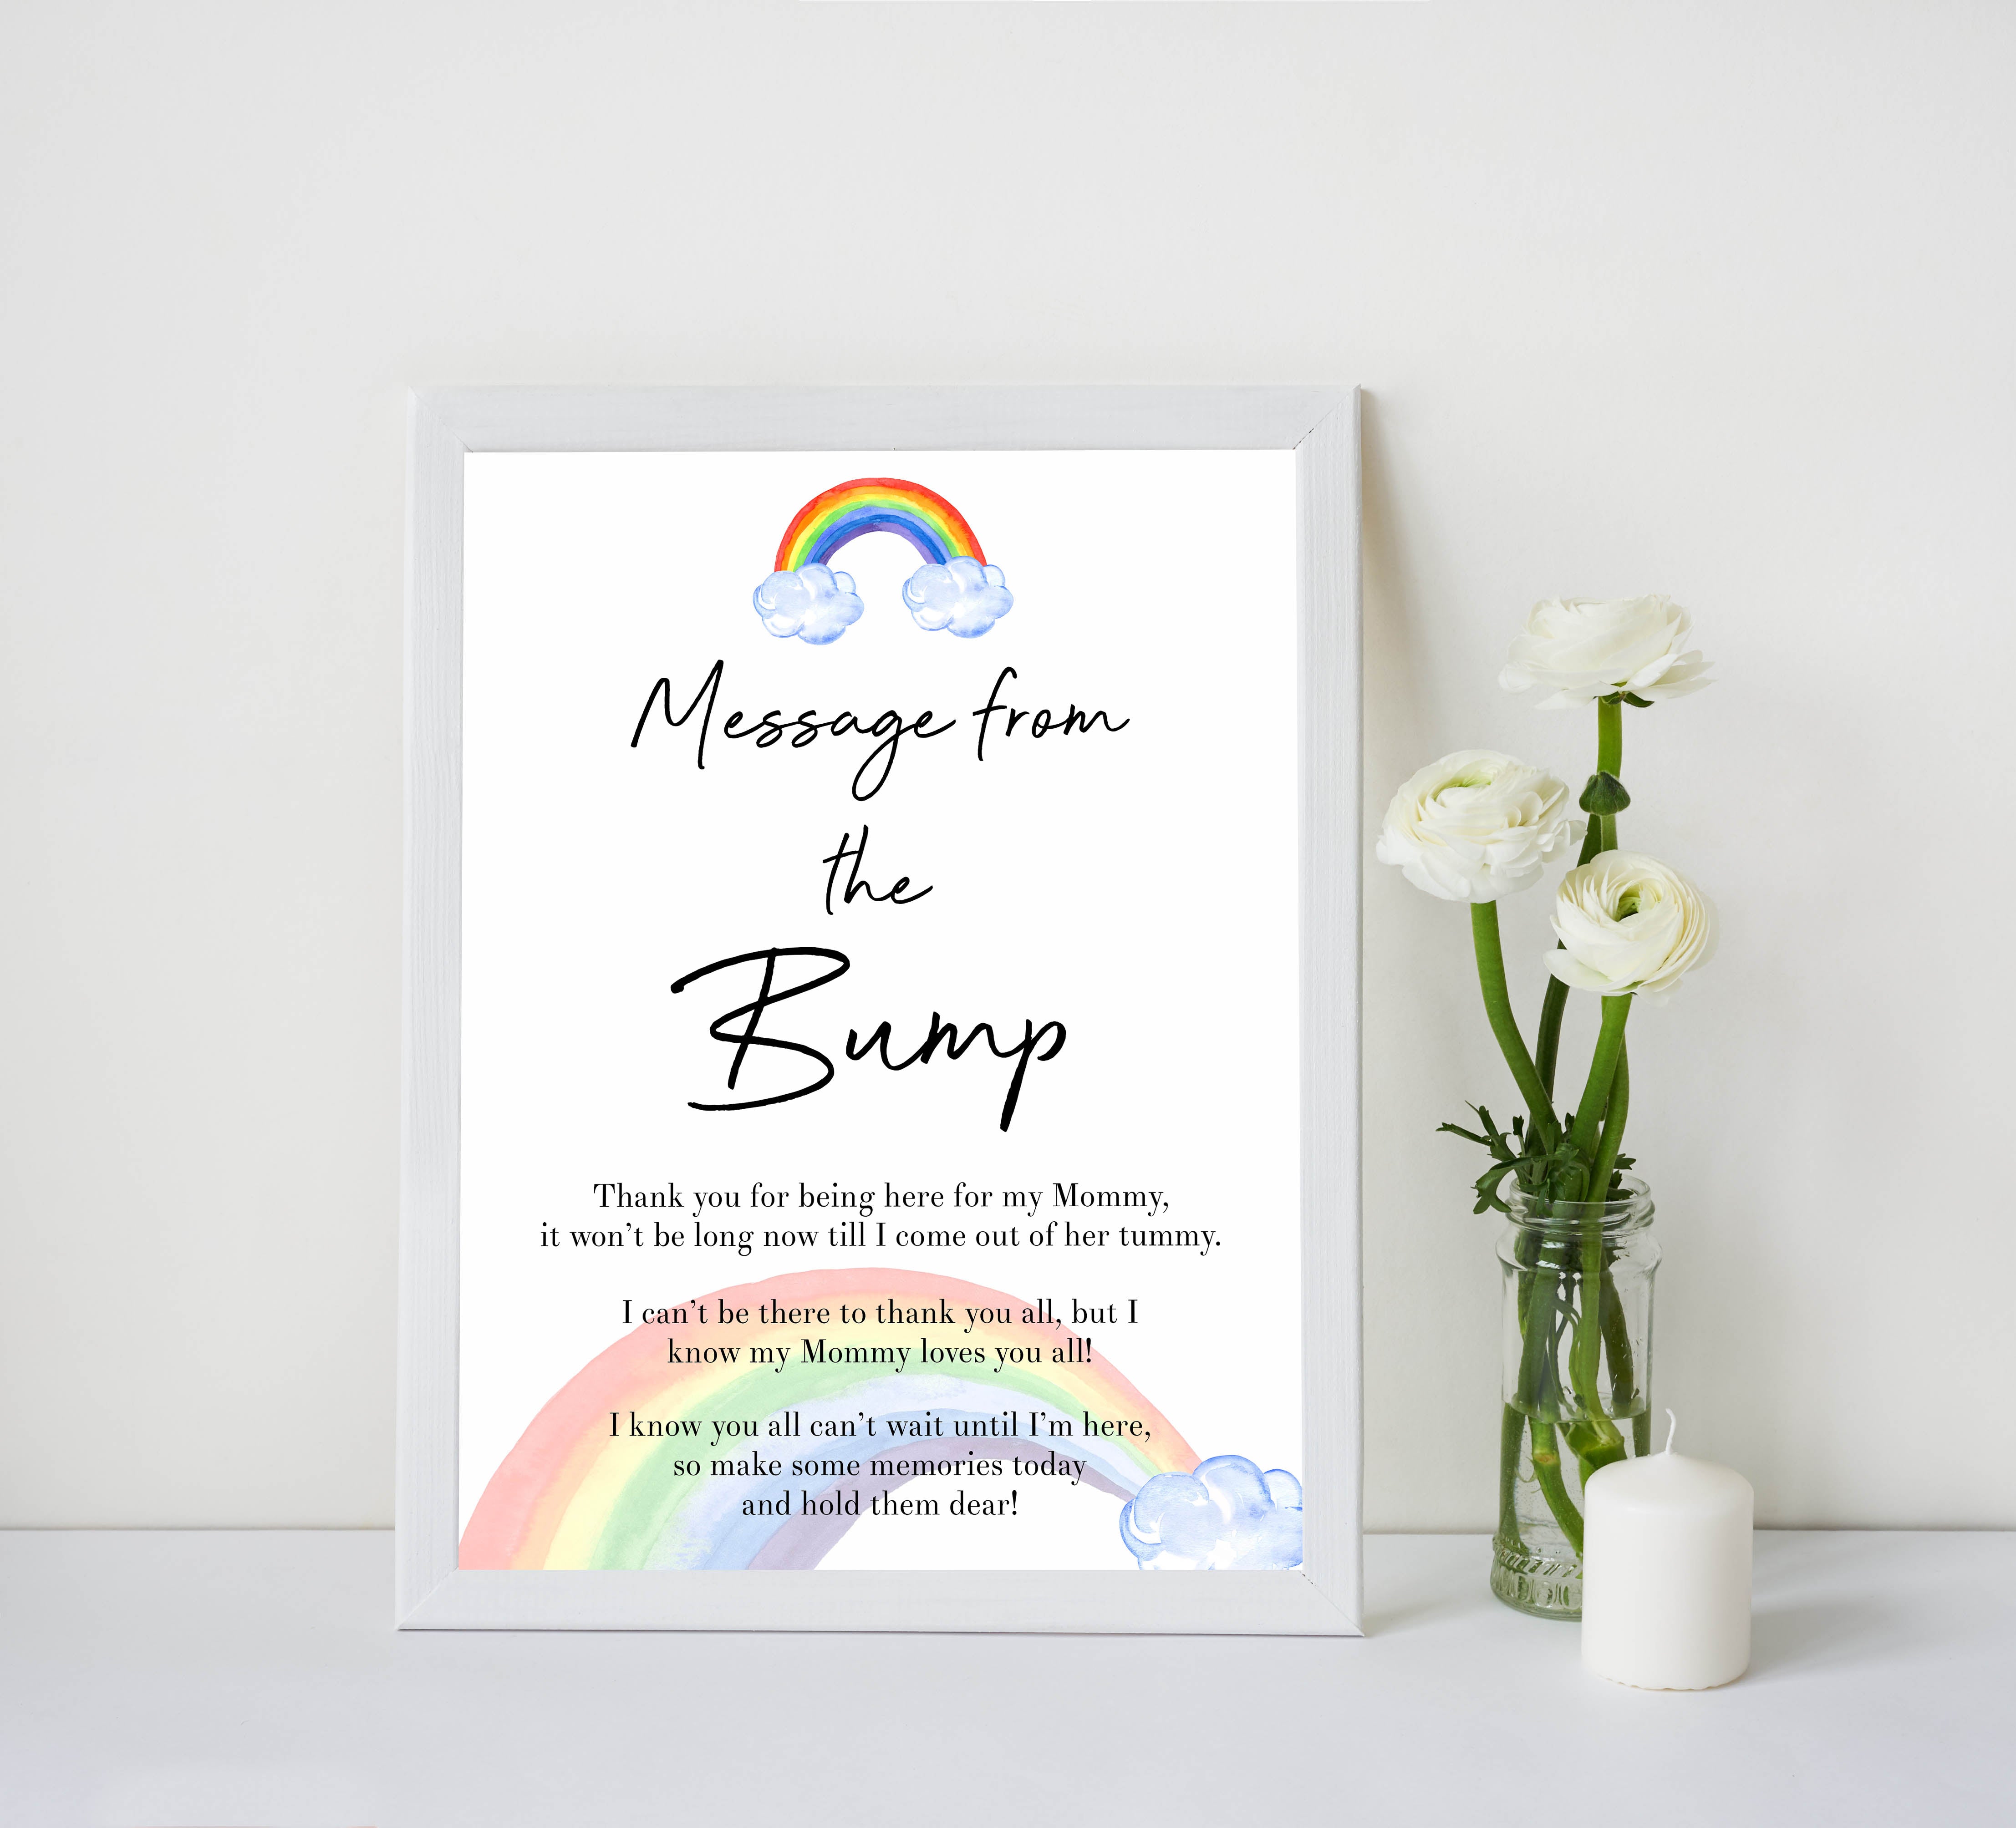 Rainbow baby games, rainbow message from the bump, rainbow printable baby games, instant download games, rainbow baby shower, printable baby games, fun baby games, popular baby games, top 10 baby games